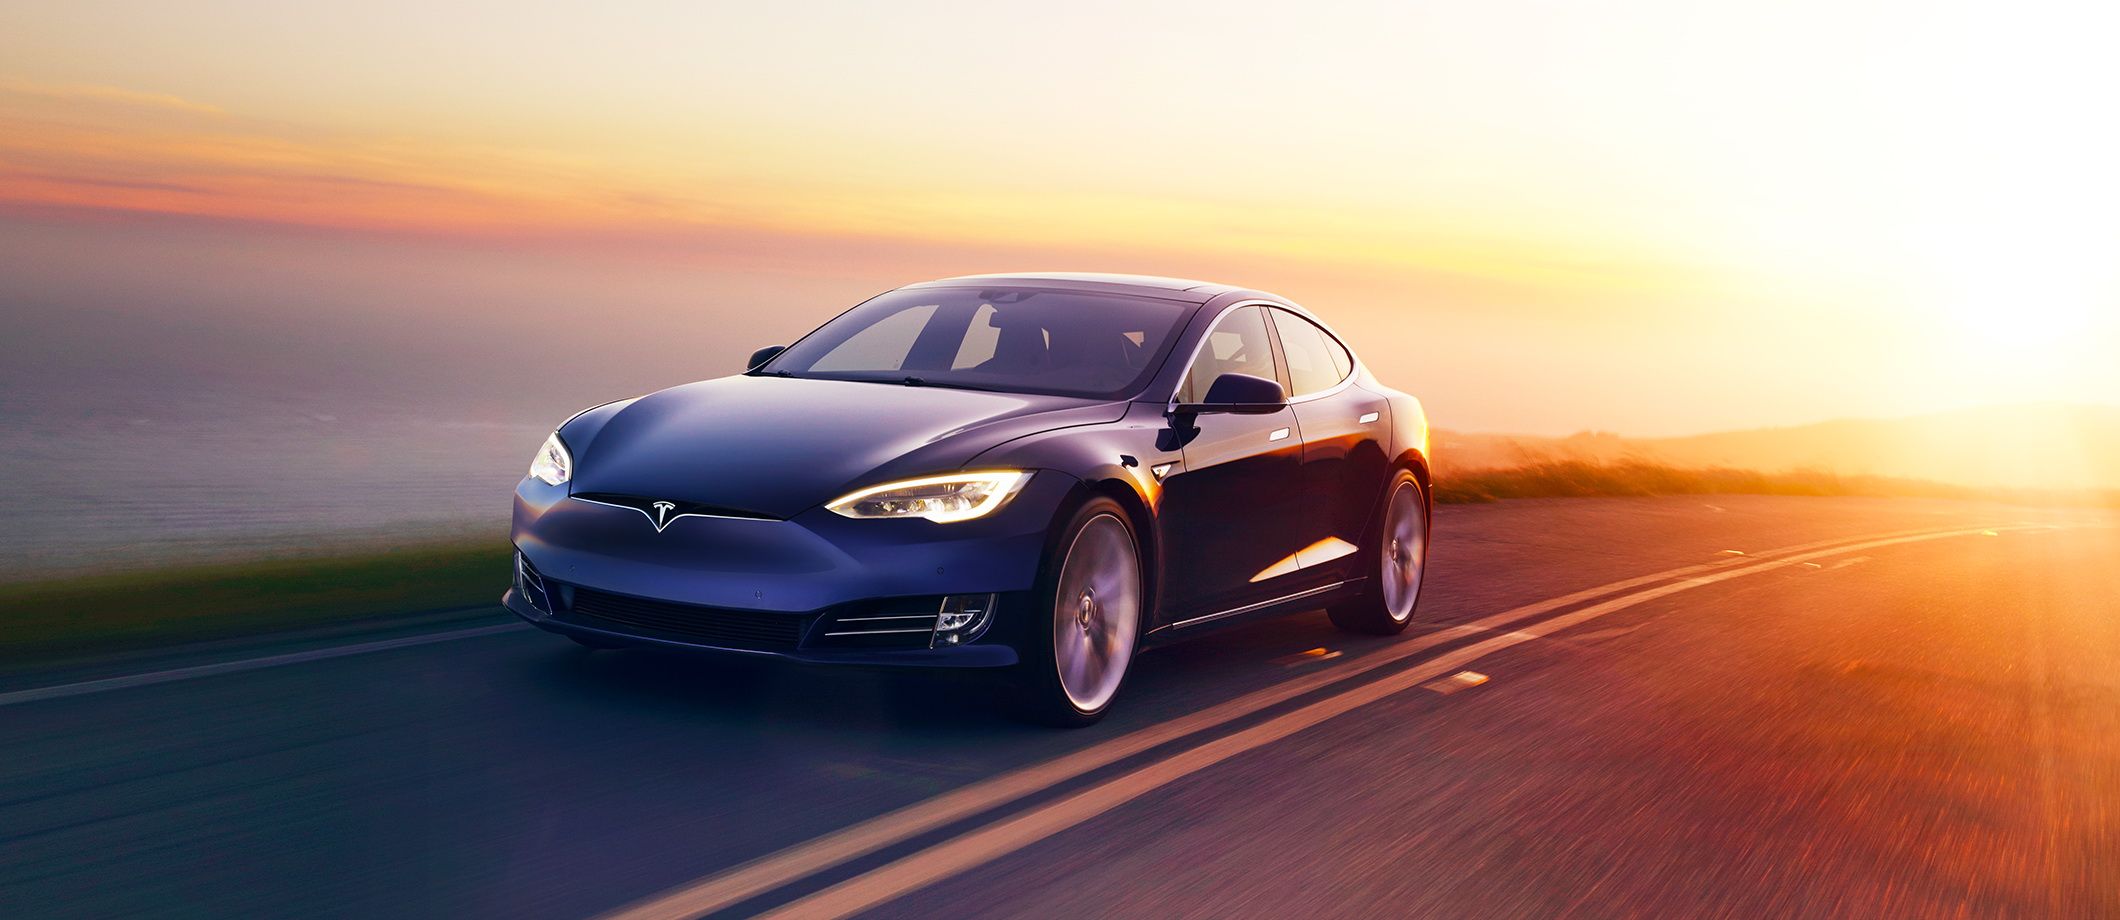 2020 Tesla Model S Could Become The First Car To Have An EPA-Rated Range Of Over 400 Miles